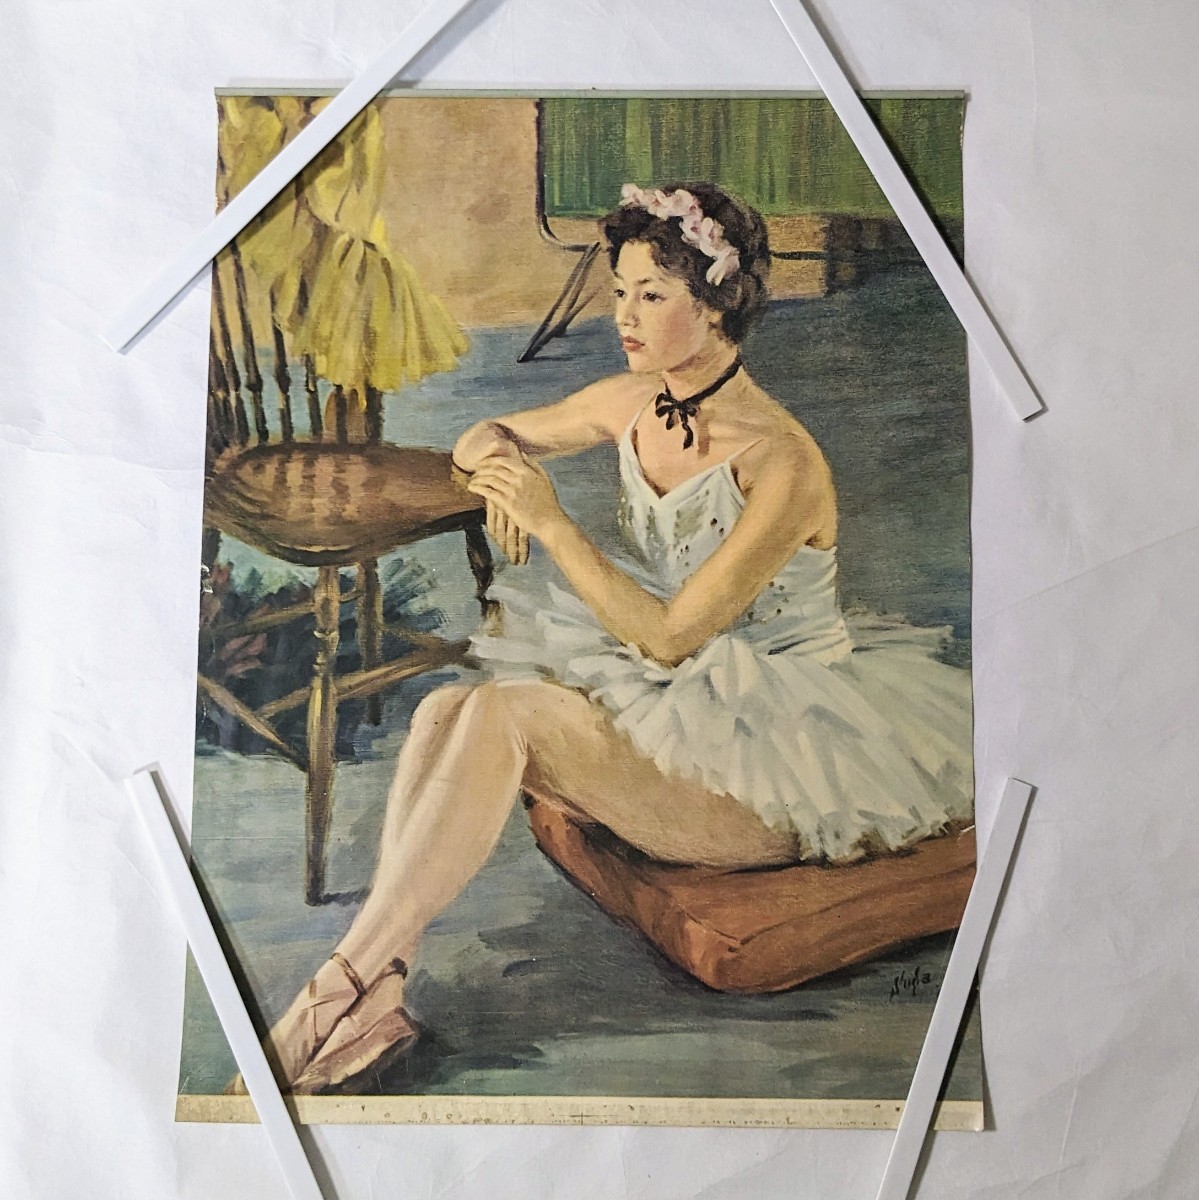  rare goods rare 1960 year . marsh hing gold six oil painting manner picture portrait painting ballet old fine art poster calendar ornament that time thing antique Vintage 